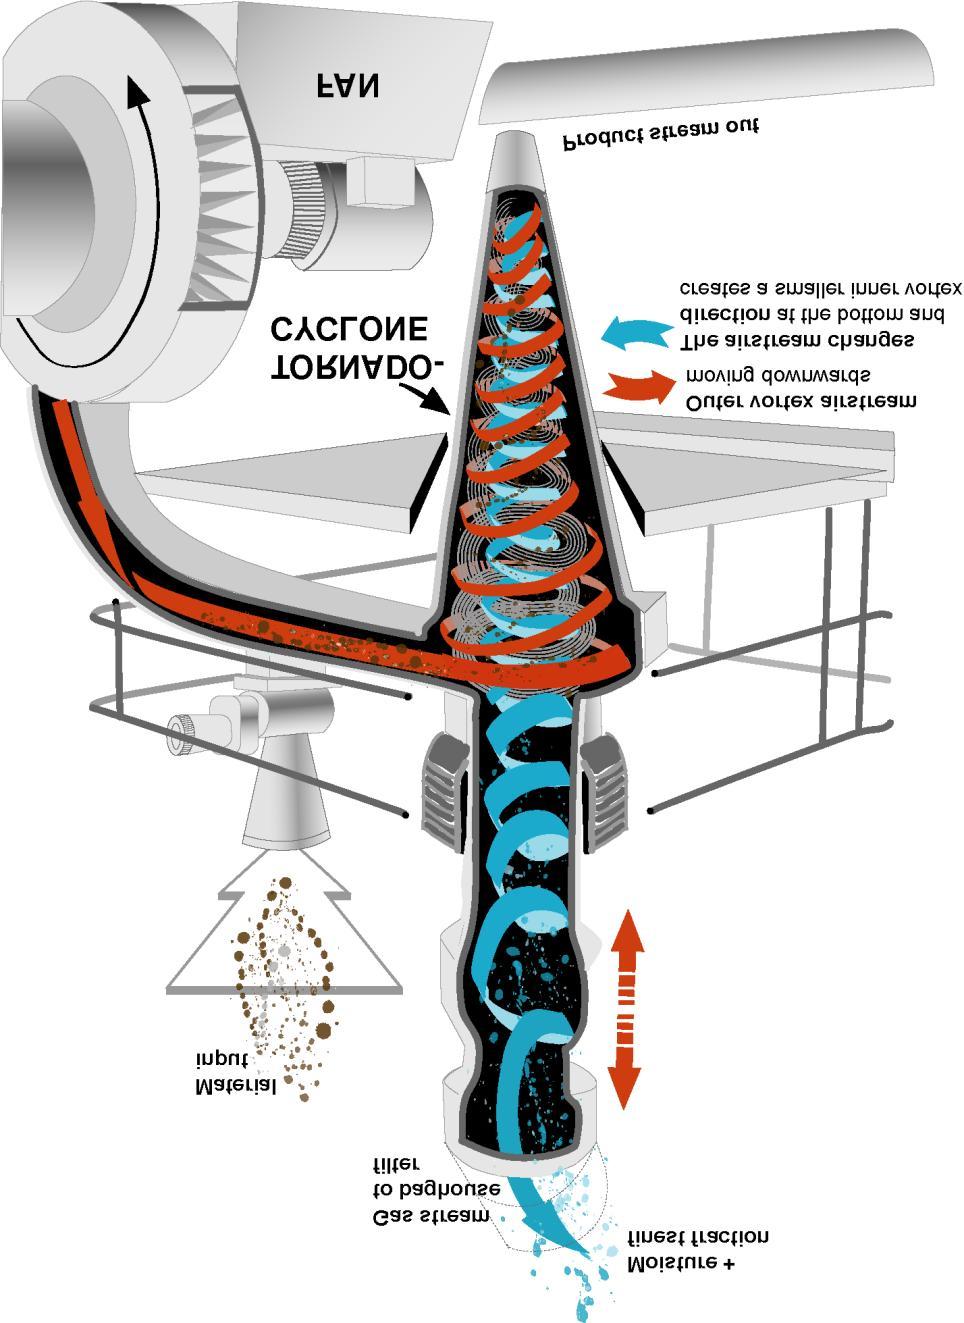 Process Description: FIGURE 1 1. A fan powered by electric motor creates an air stream. 2. Material is taken by the stream and flows into a cyclone-formed device. 3.